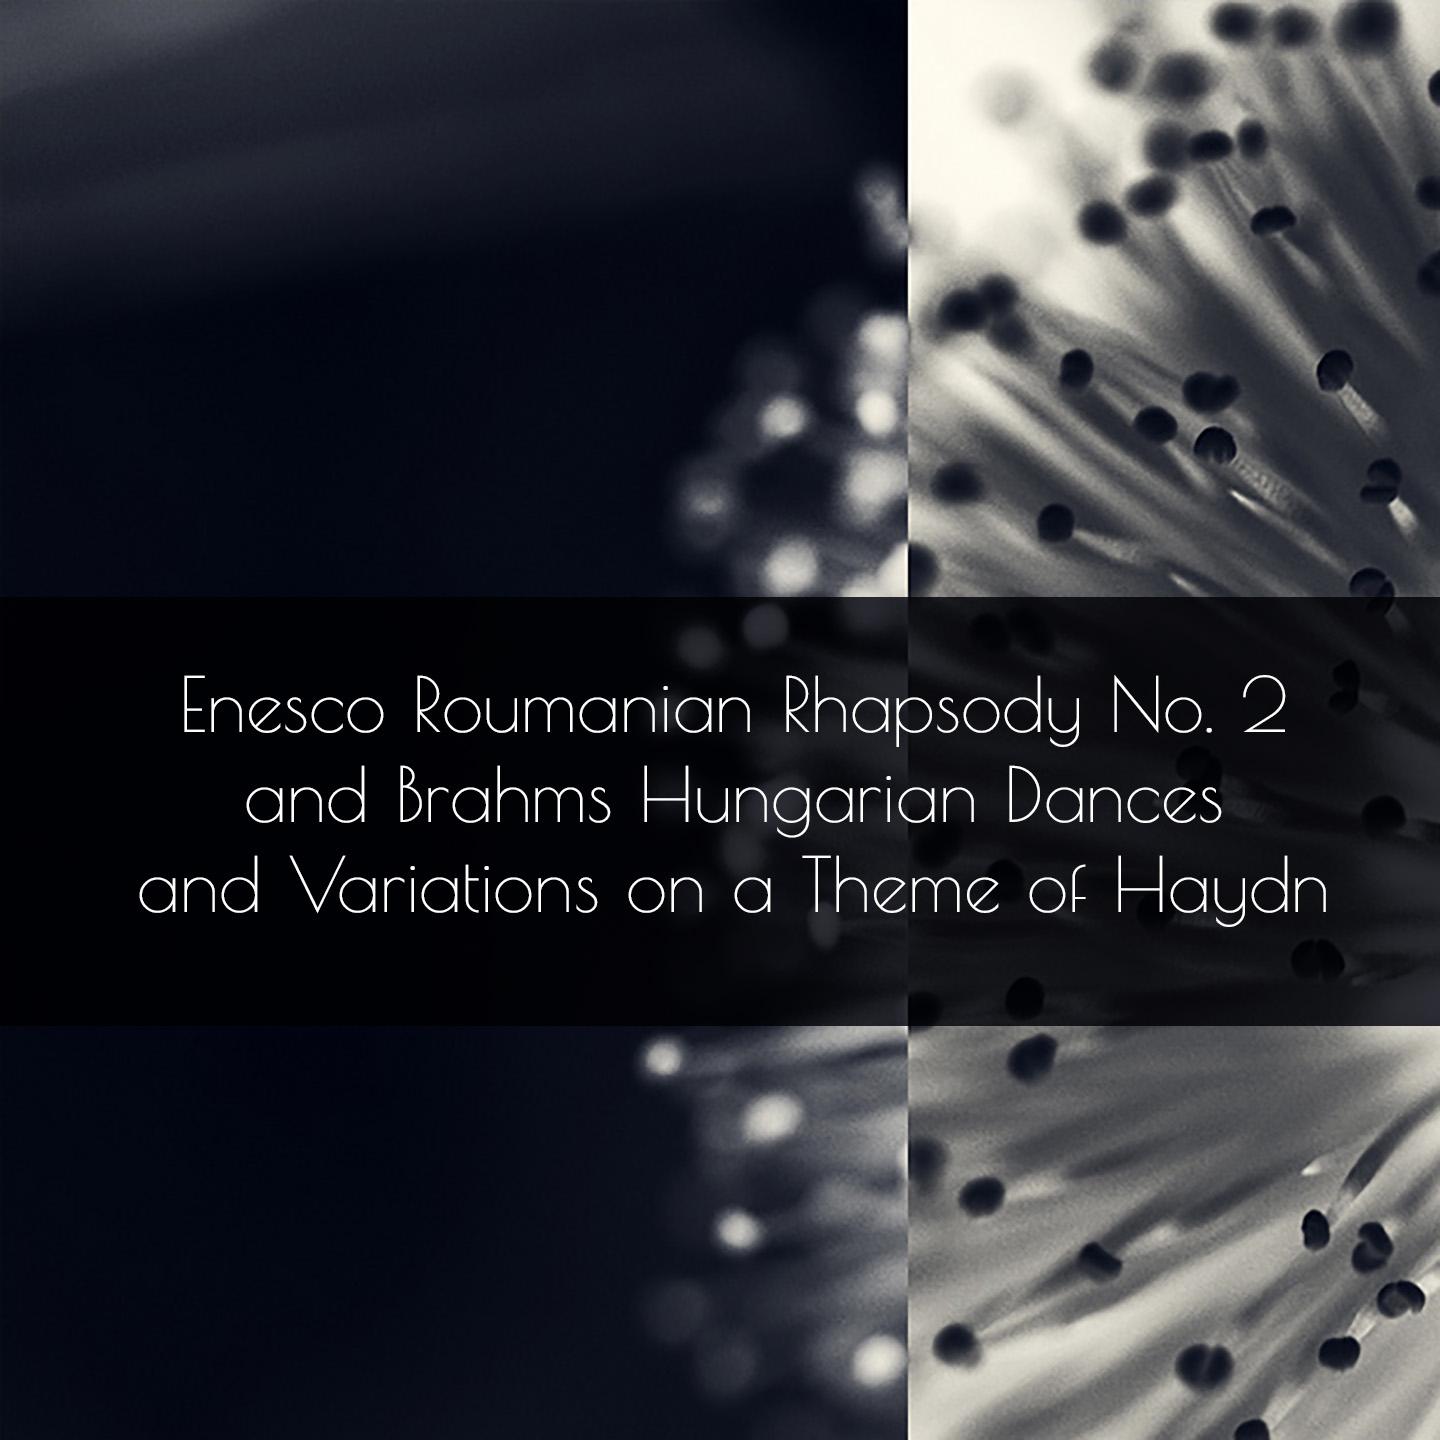 Variations on a Theme by Haydn in BFlat Major, Op. 56a: No. 2, Variation I. Poco piu Animato